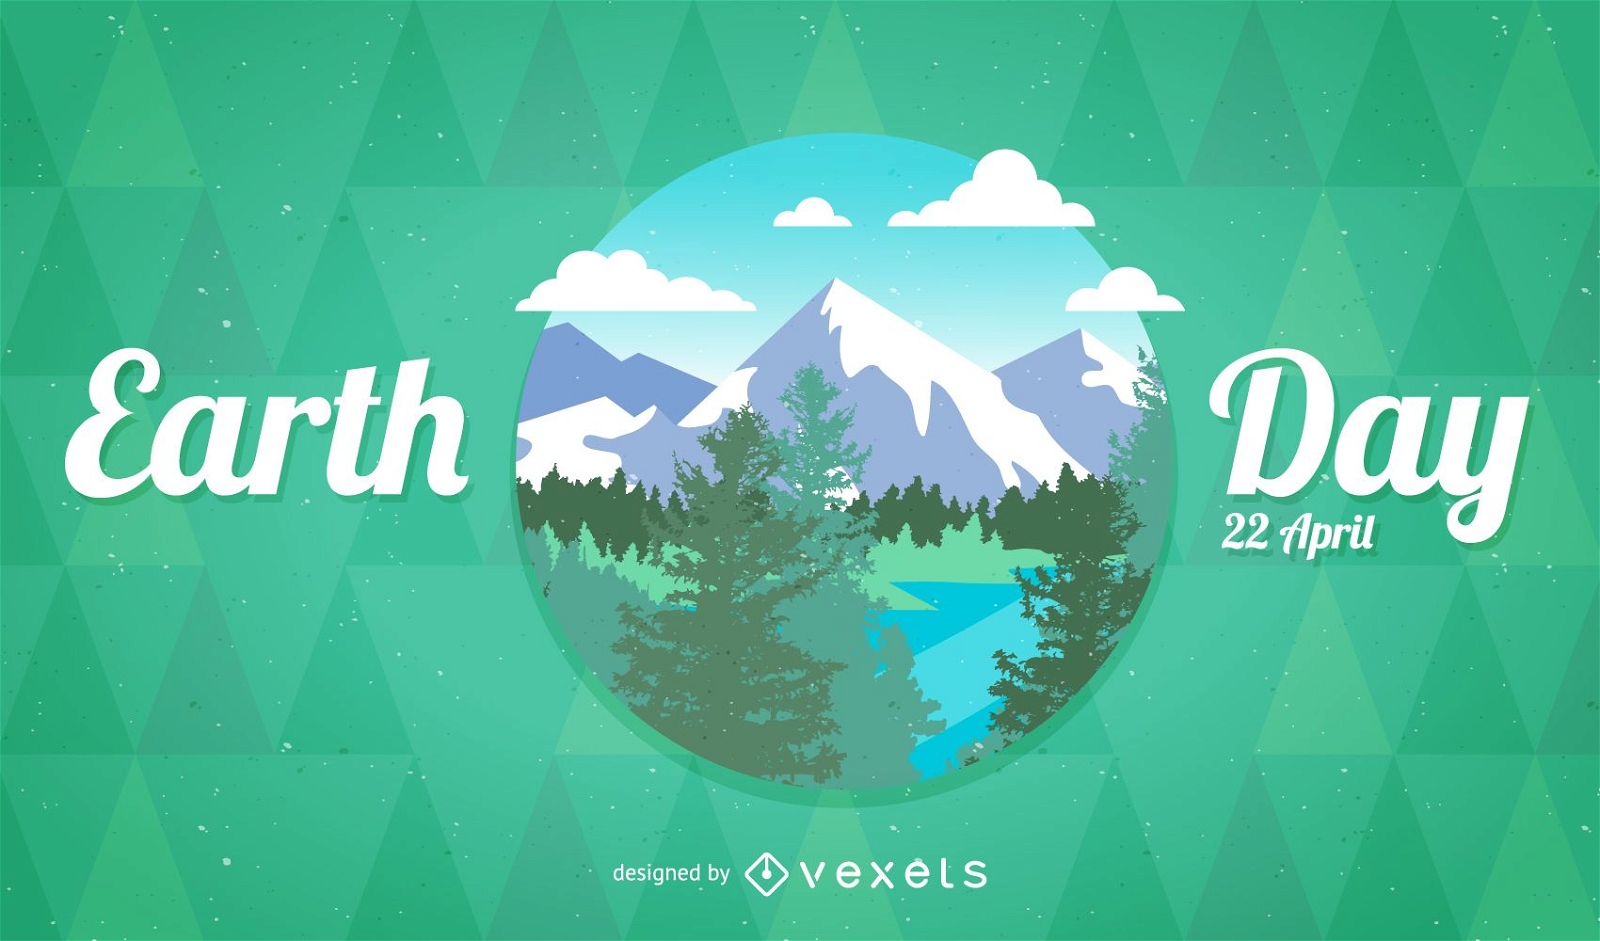 Earth Day badge with mountains